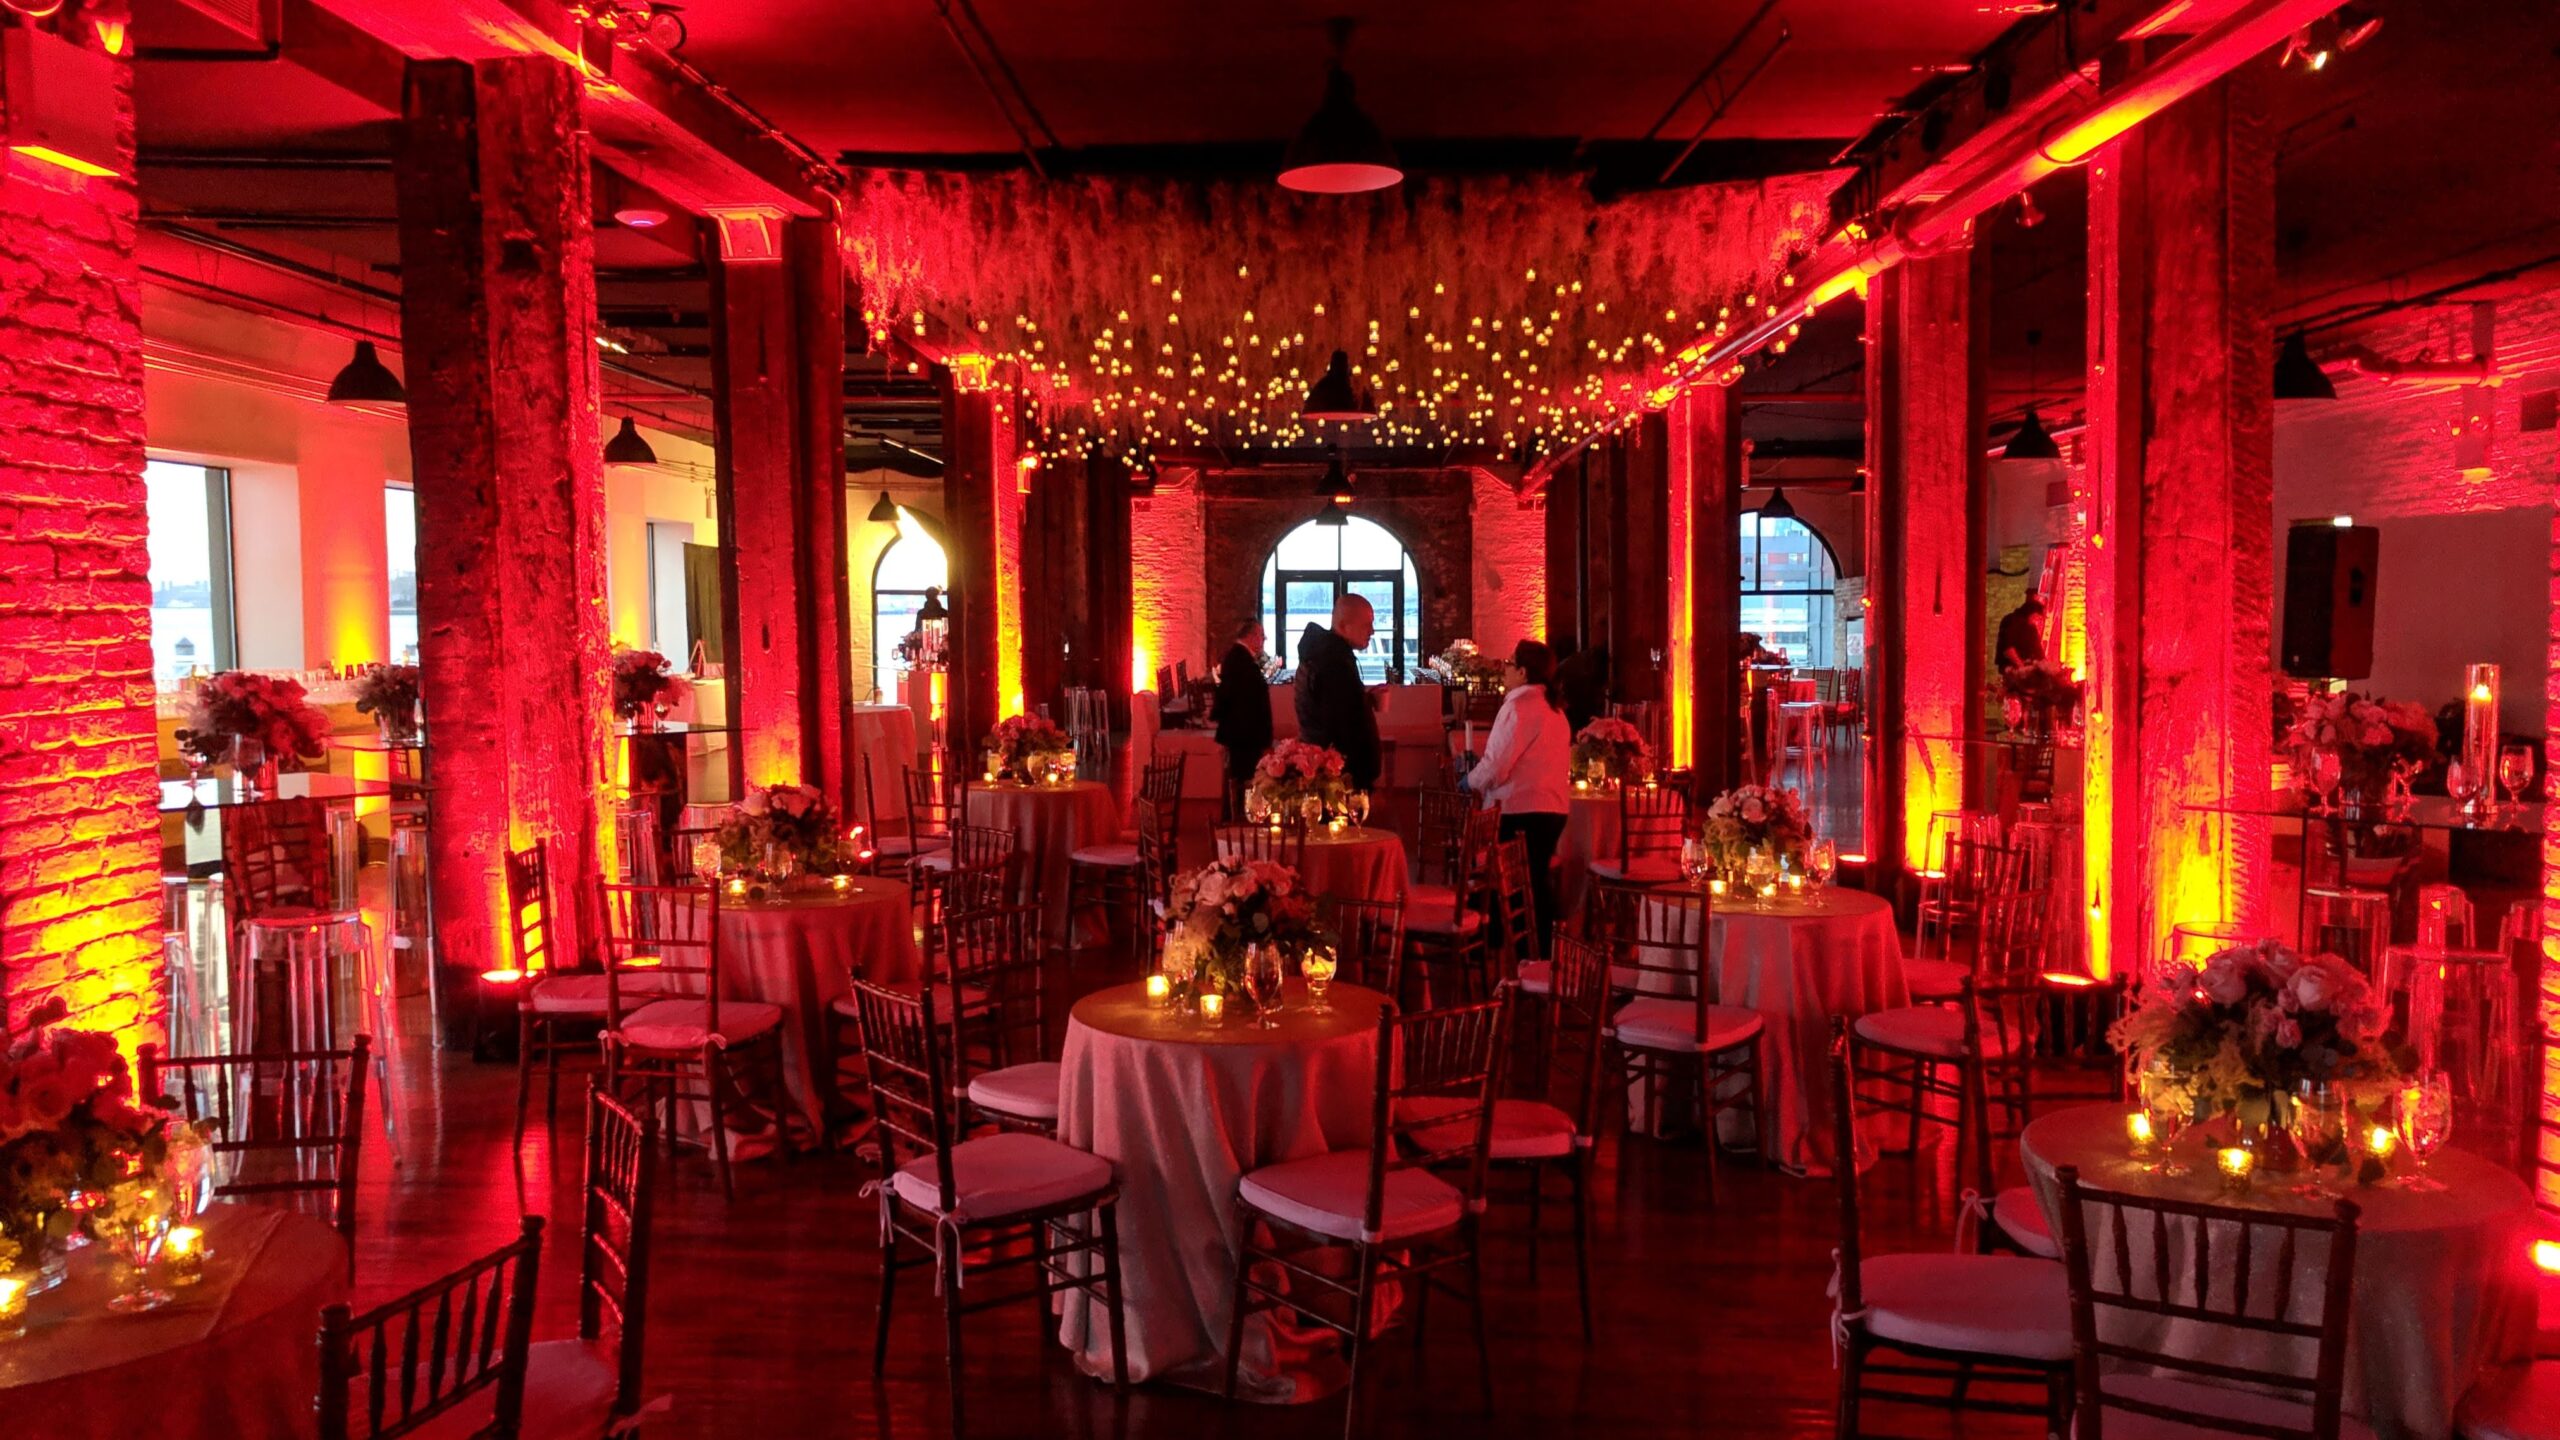 Dinner seating with Red Uplighting at Rustic wedding venue Libery Warehouse Brooklyn NY